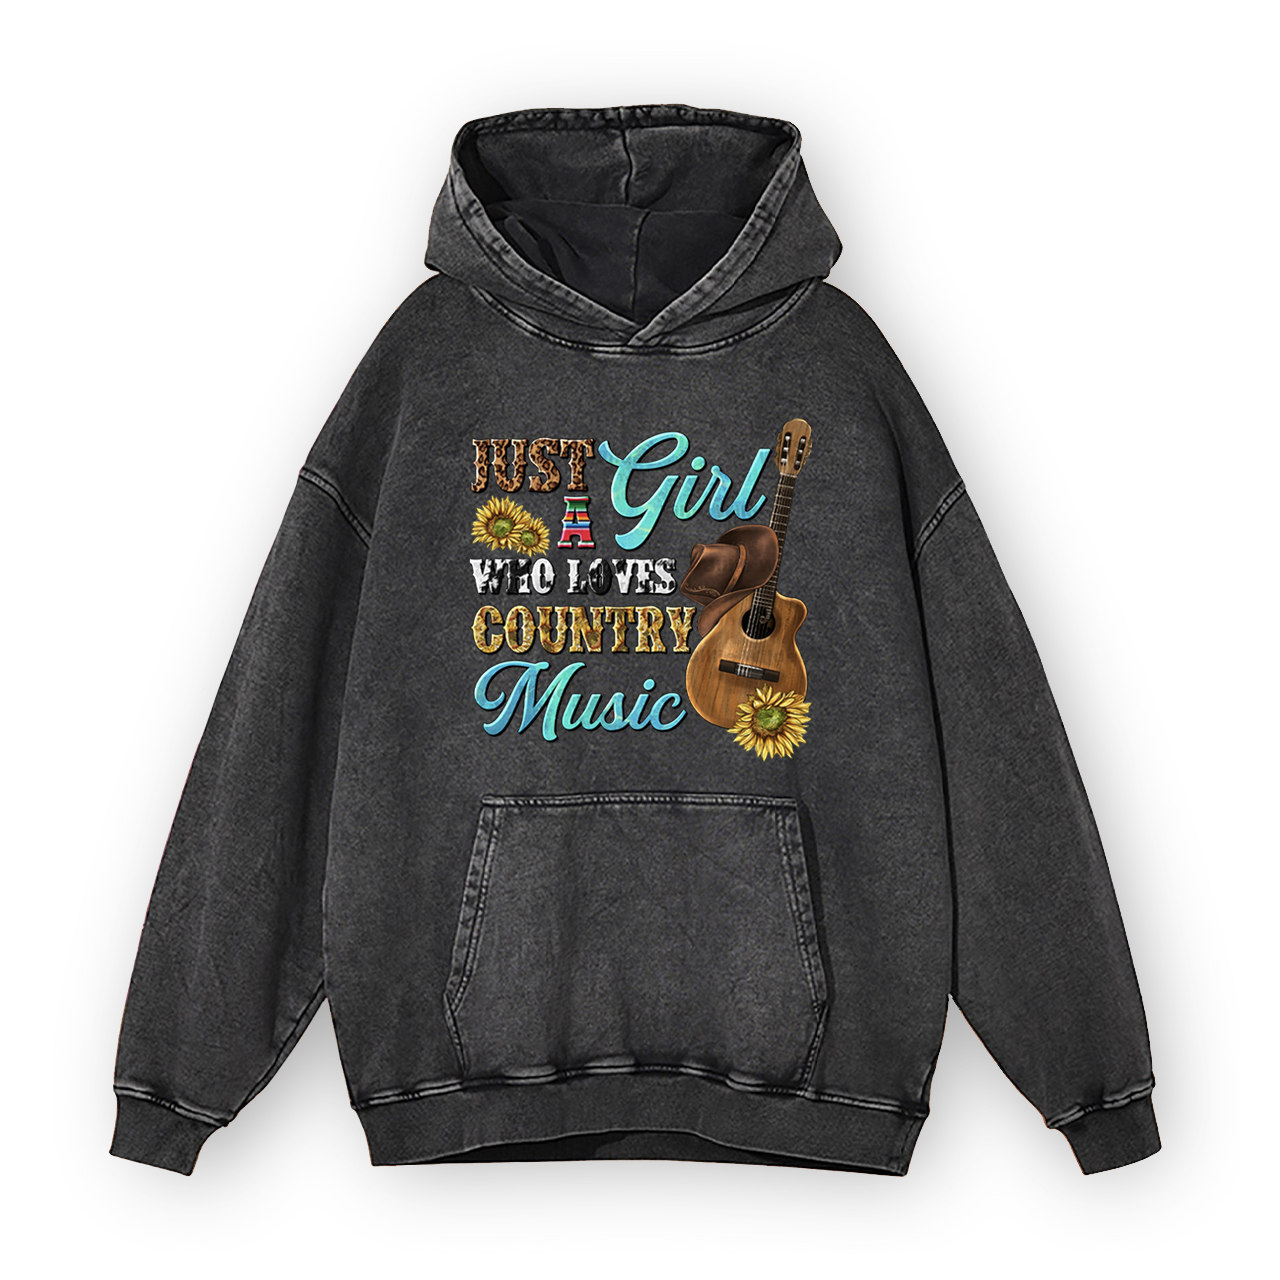 Just a Girl who Loves Country Music Garment-Dye Hoodies